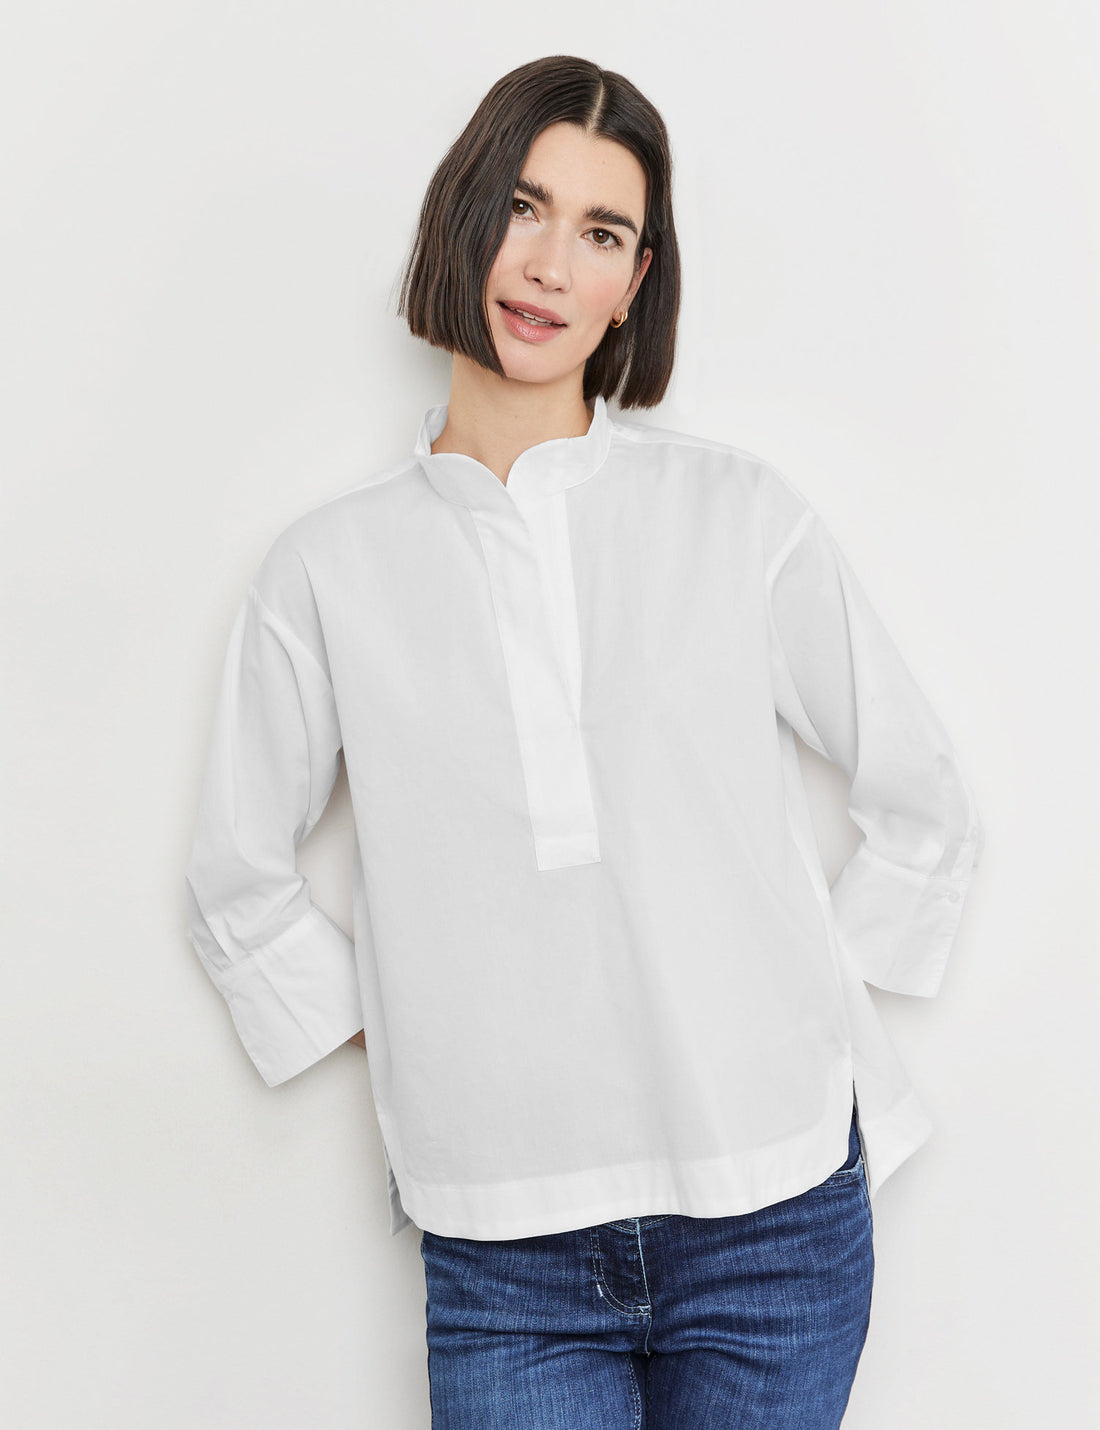 3/4-Sleeve Blouse Made Of Sustainable Cotton_965048-66406_99600_01